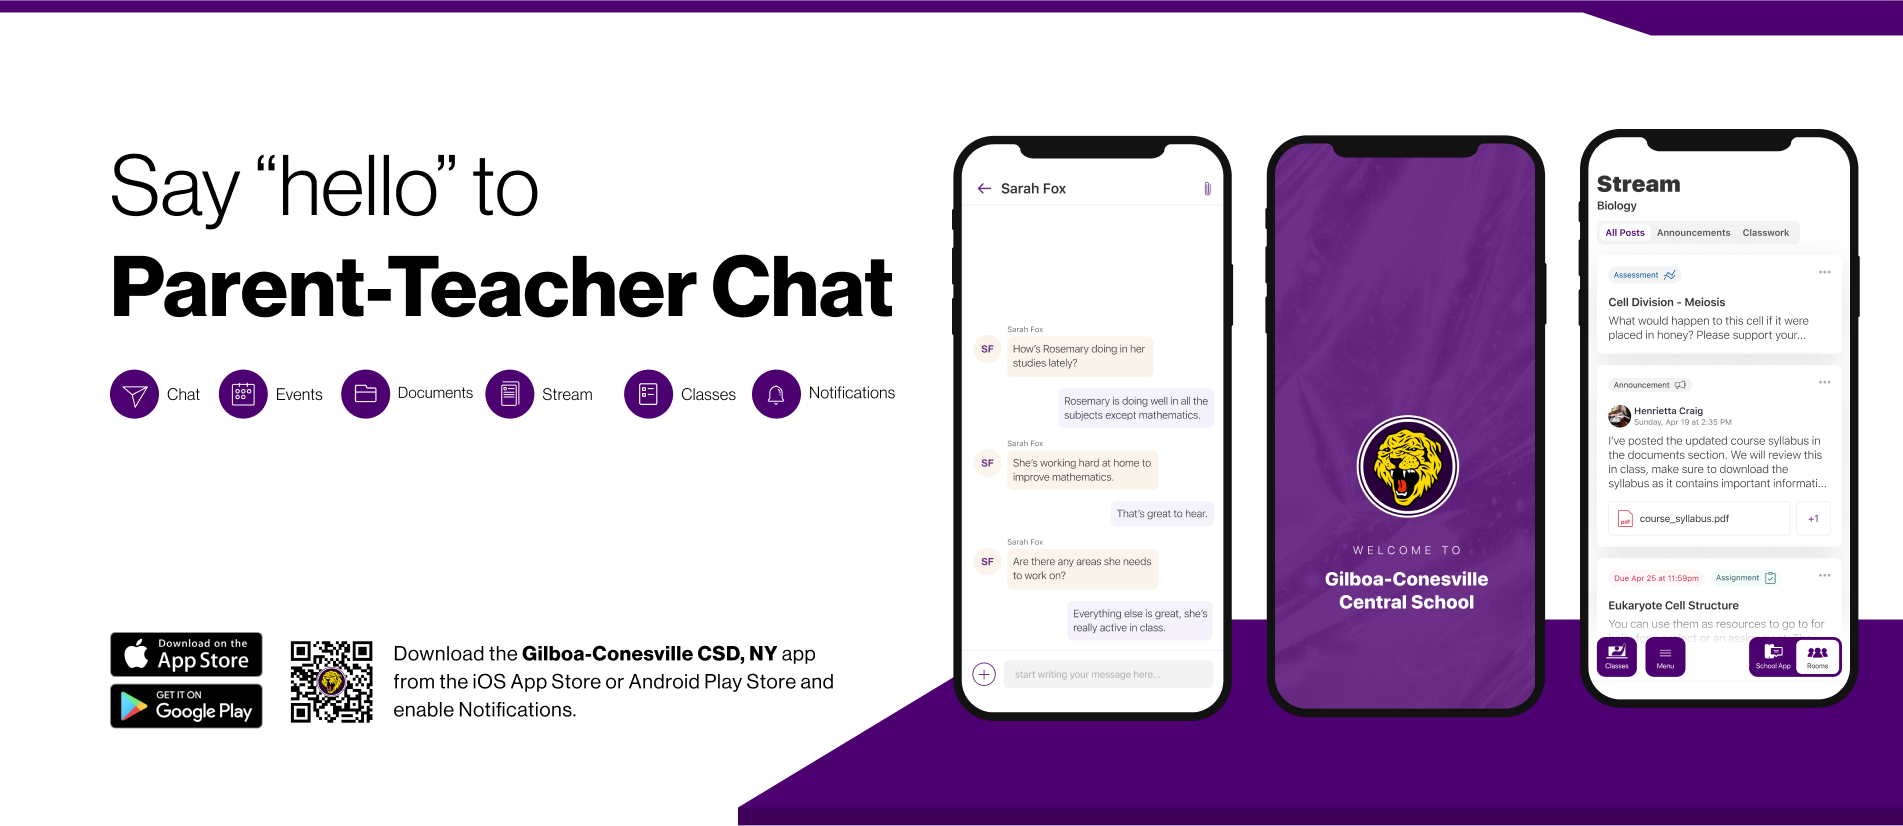 Say hello to Parent-Teacher chat in the new Rooms app. Download the Gilboa-Conesville Central School app in the Google Play or Apple App store.